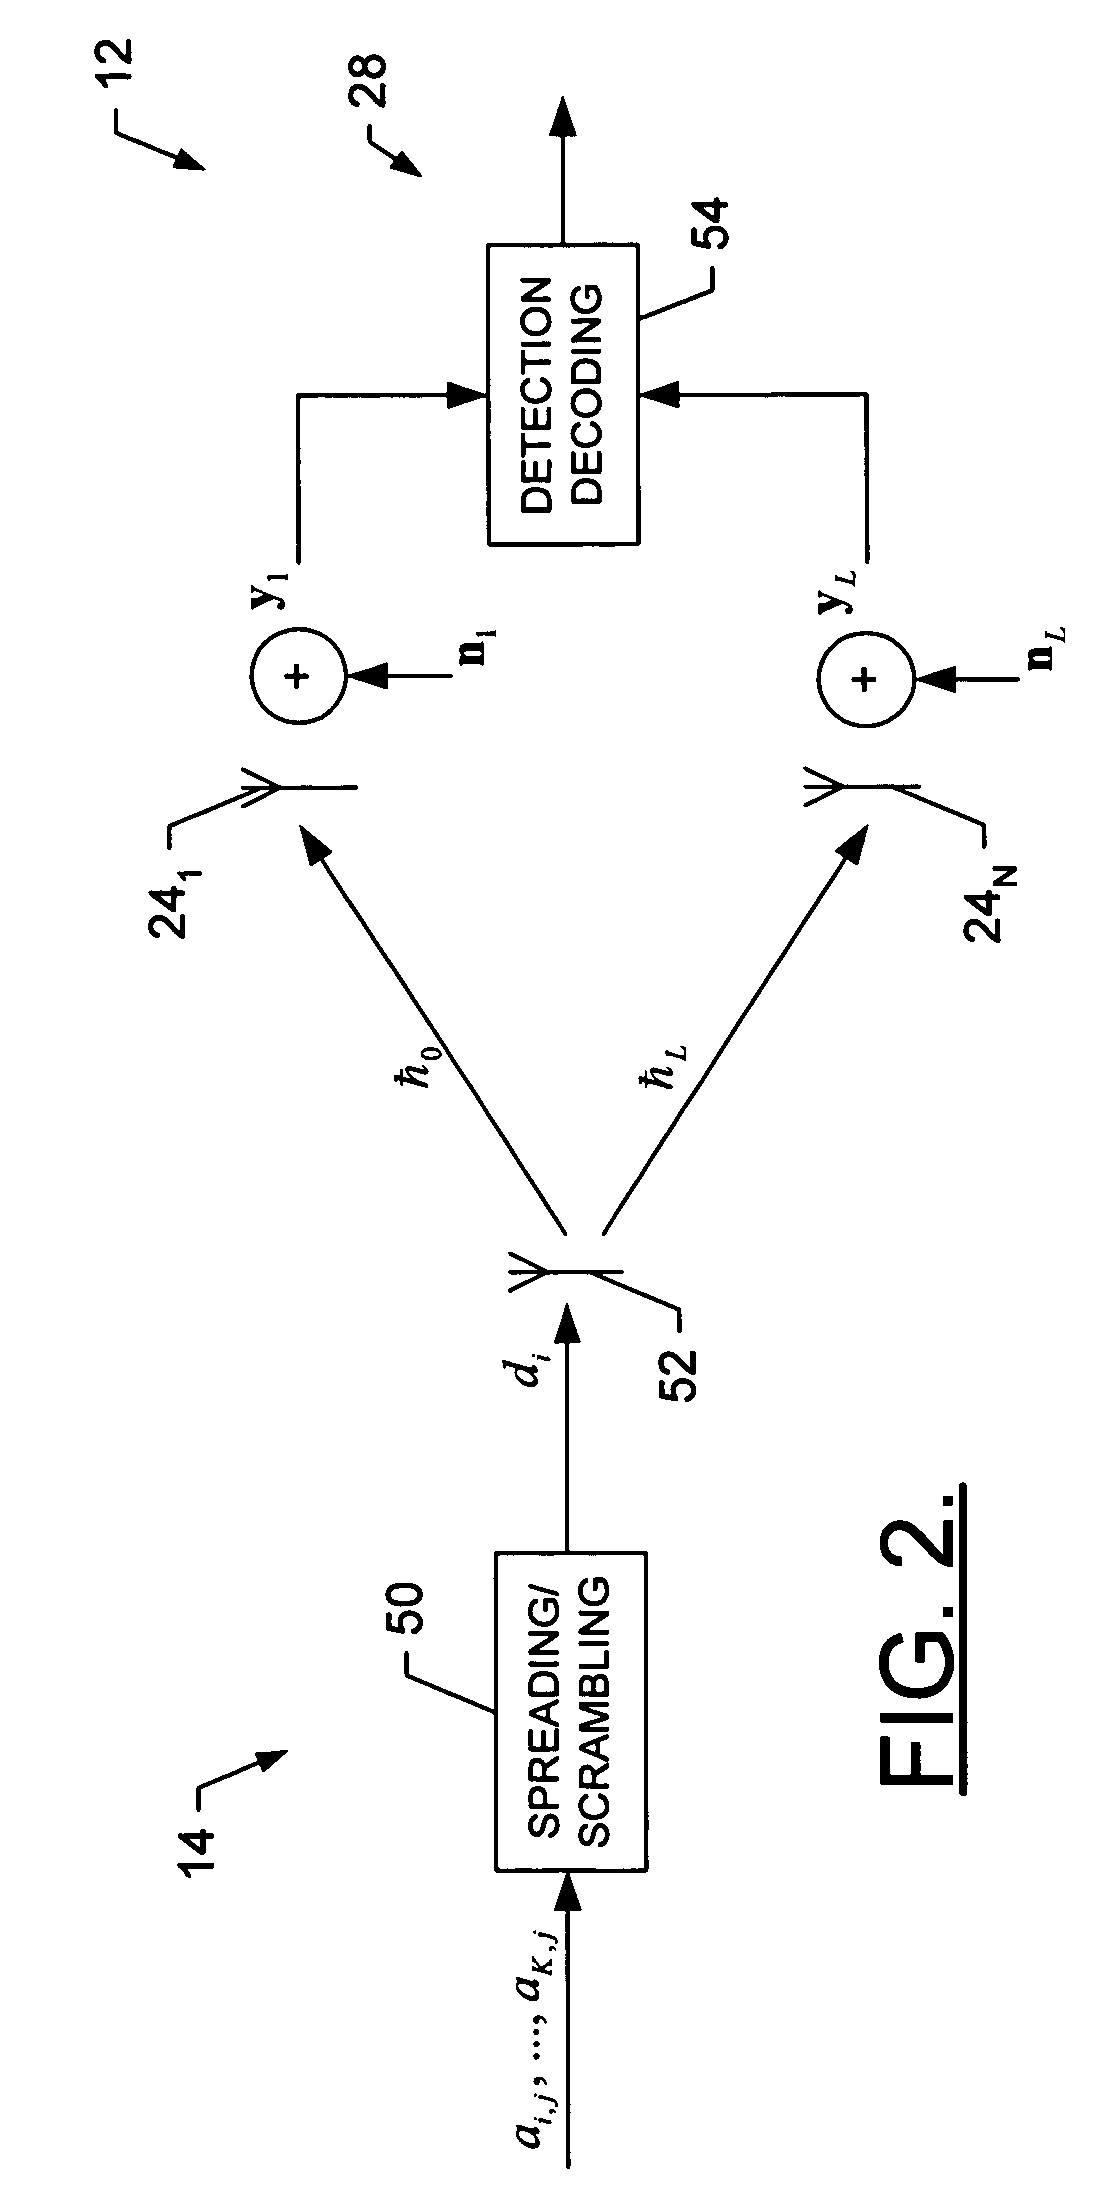 Iterative and turbo-based method and apparatus for equalization of spread-spectrum downlink channels